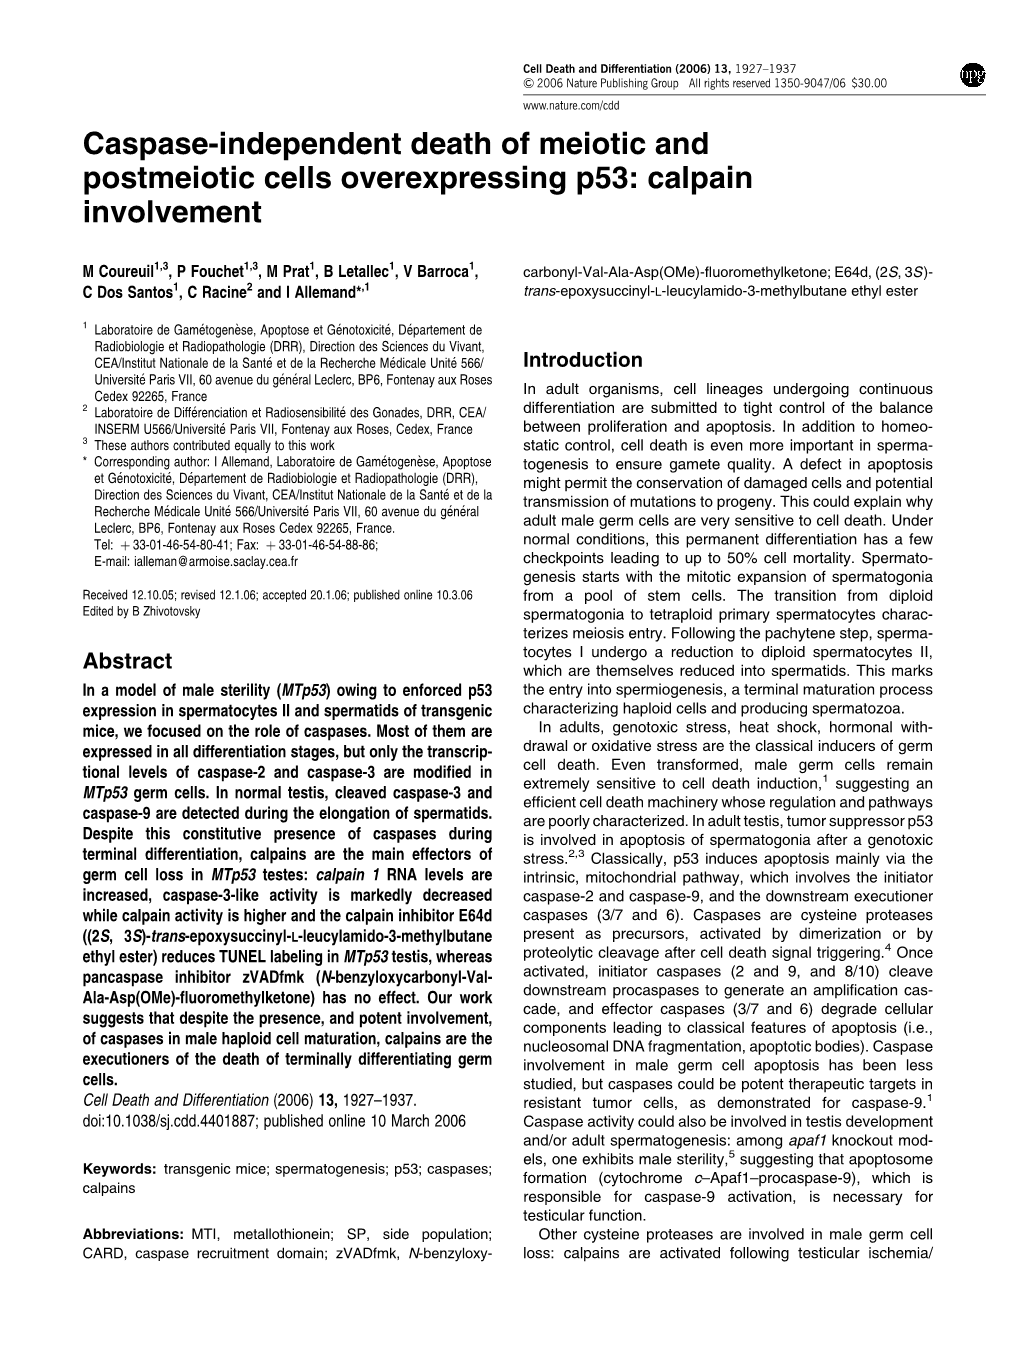 Caspase-Independent Death of Meiotic and Postmeiotic Cells Overexpressing P53: Calpain Involvement